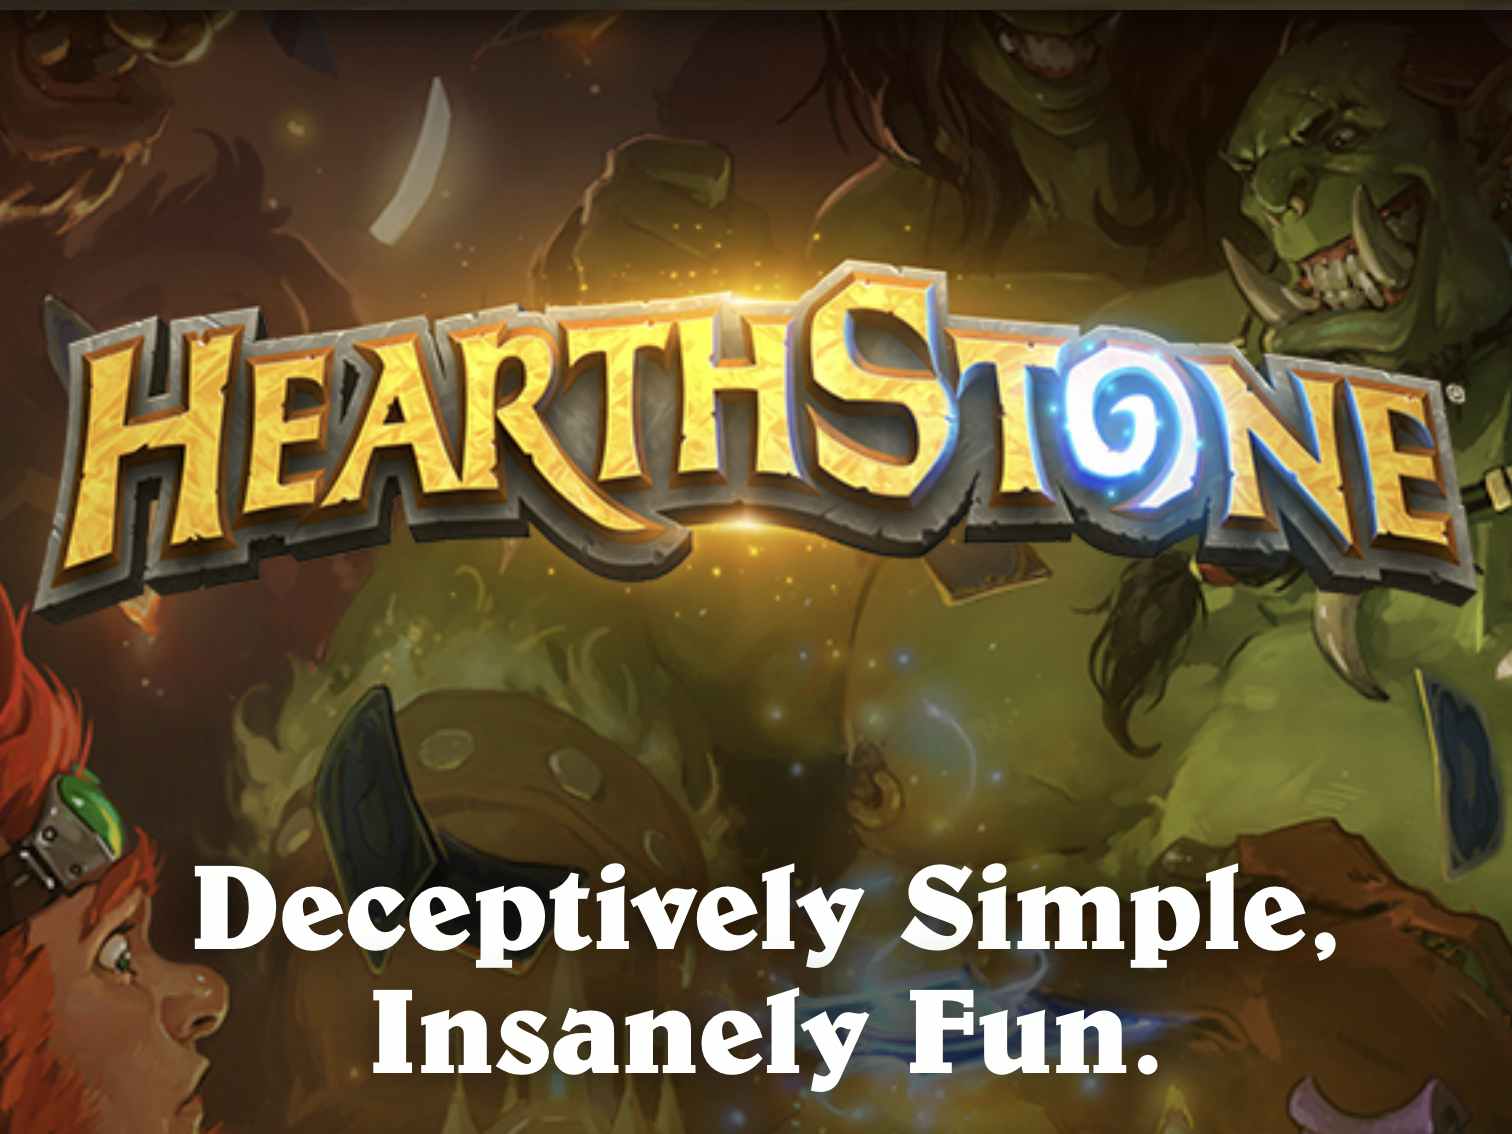 A screenshot of the banner and title from the Hearthstone website.